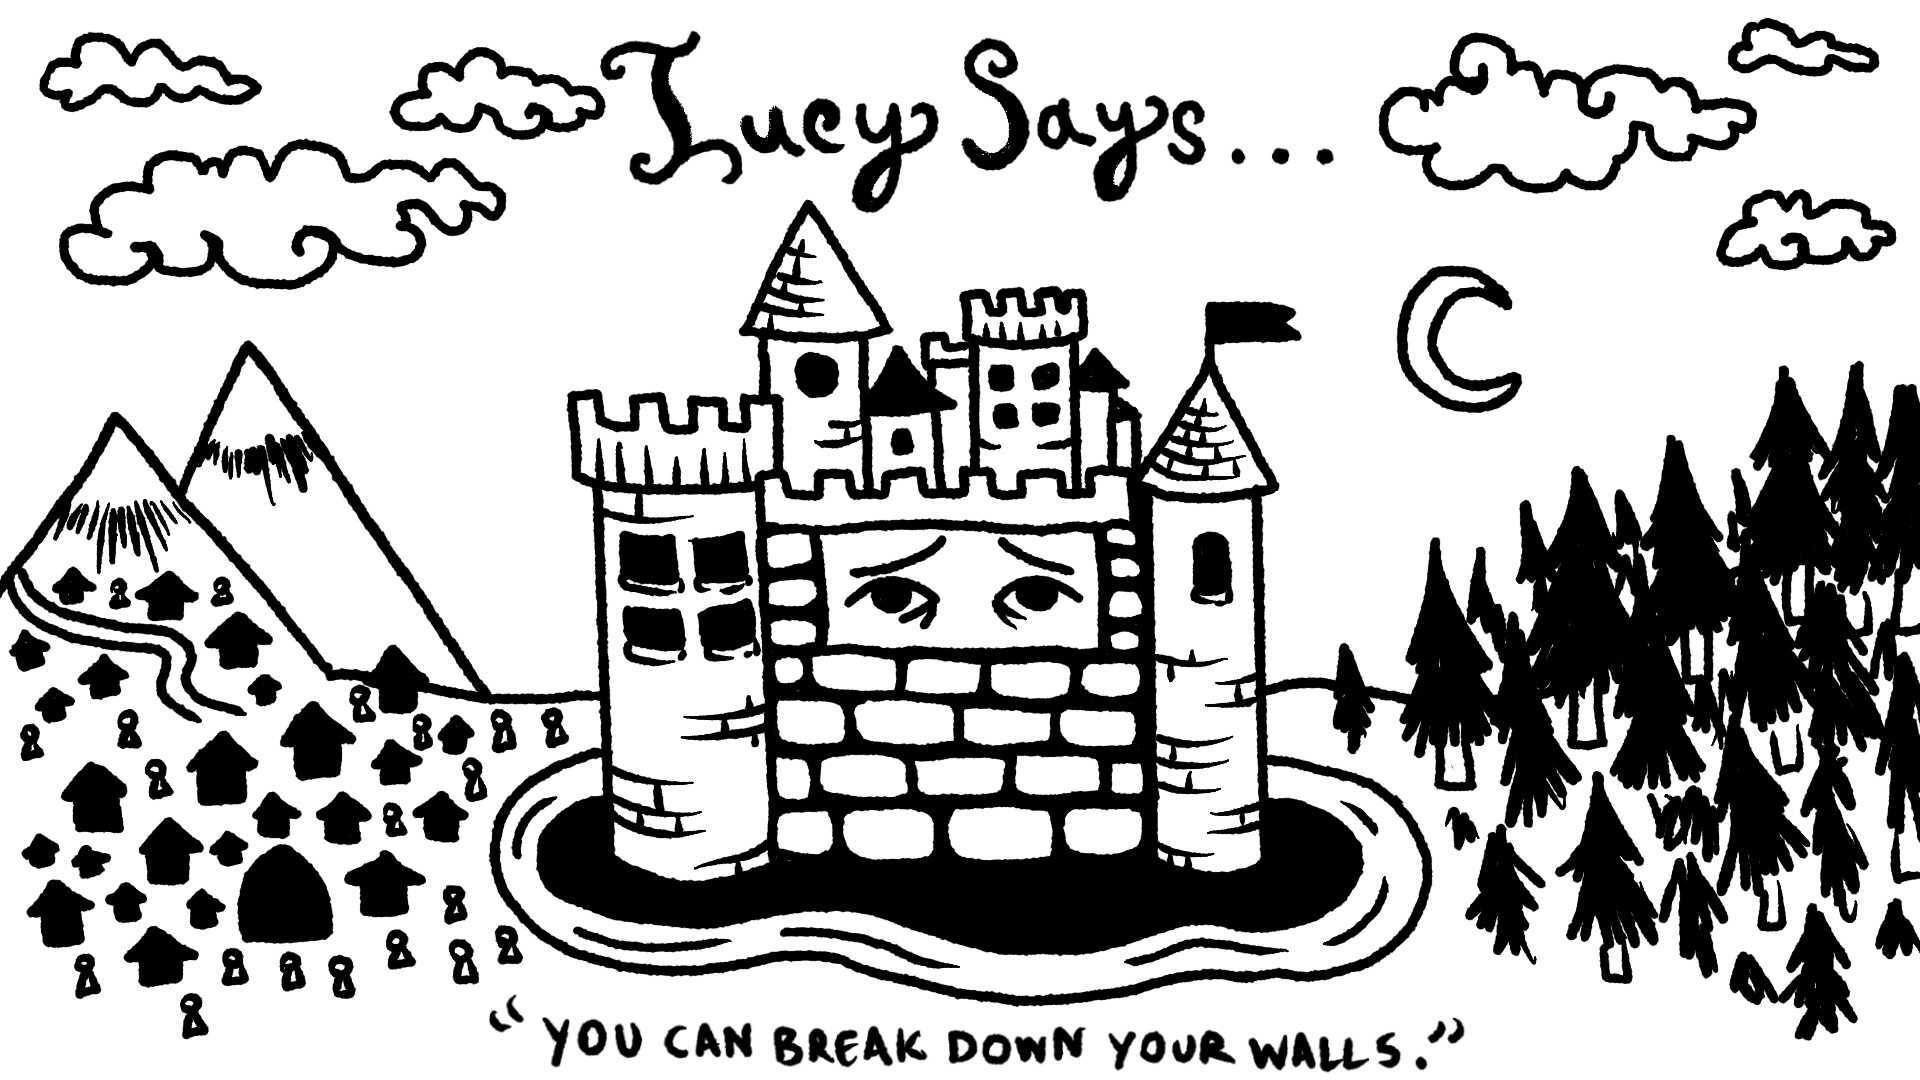 Eyes peek out from a fortress-like structure; caption reads “Lucy says… “you can break down your walls.”